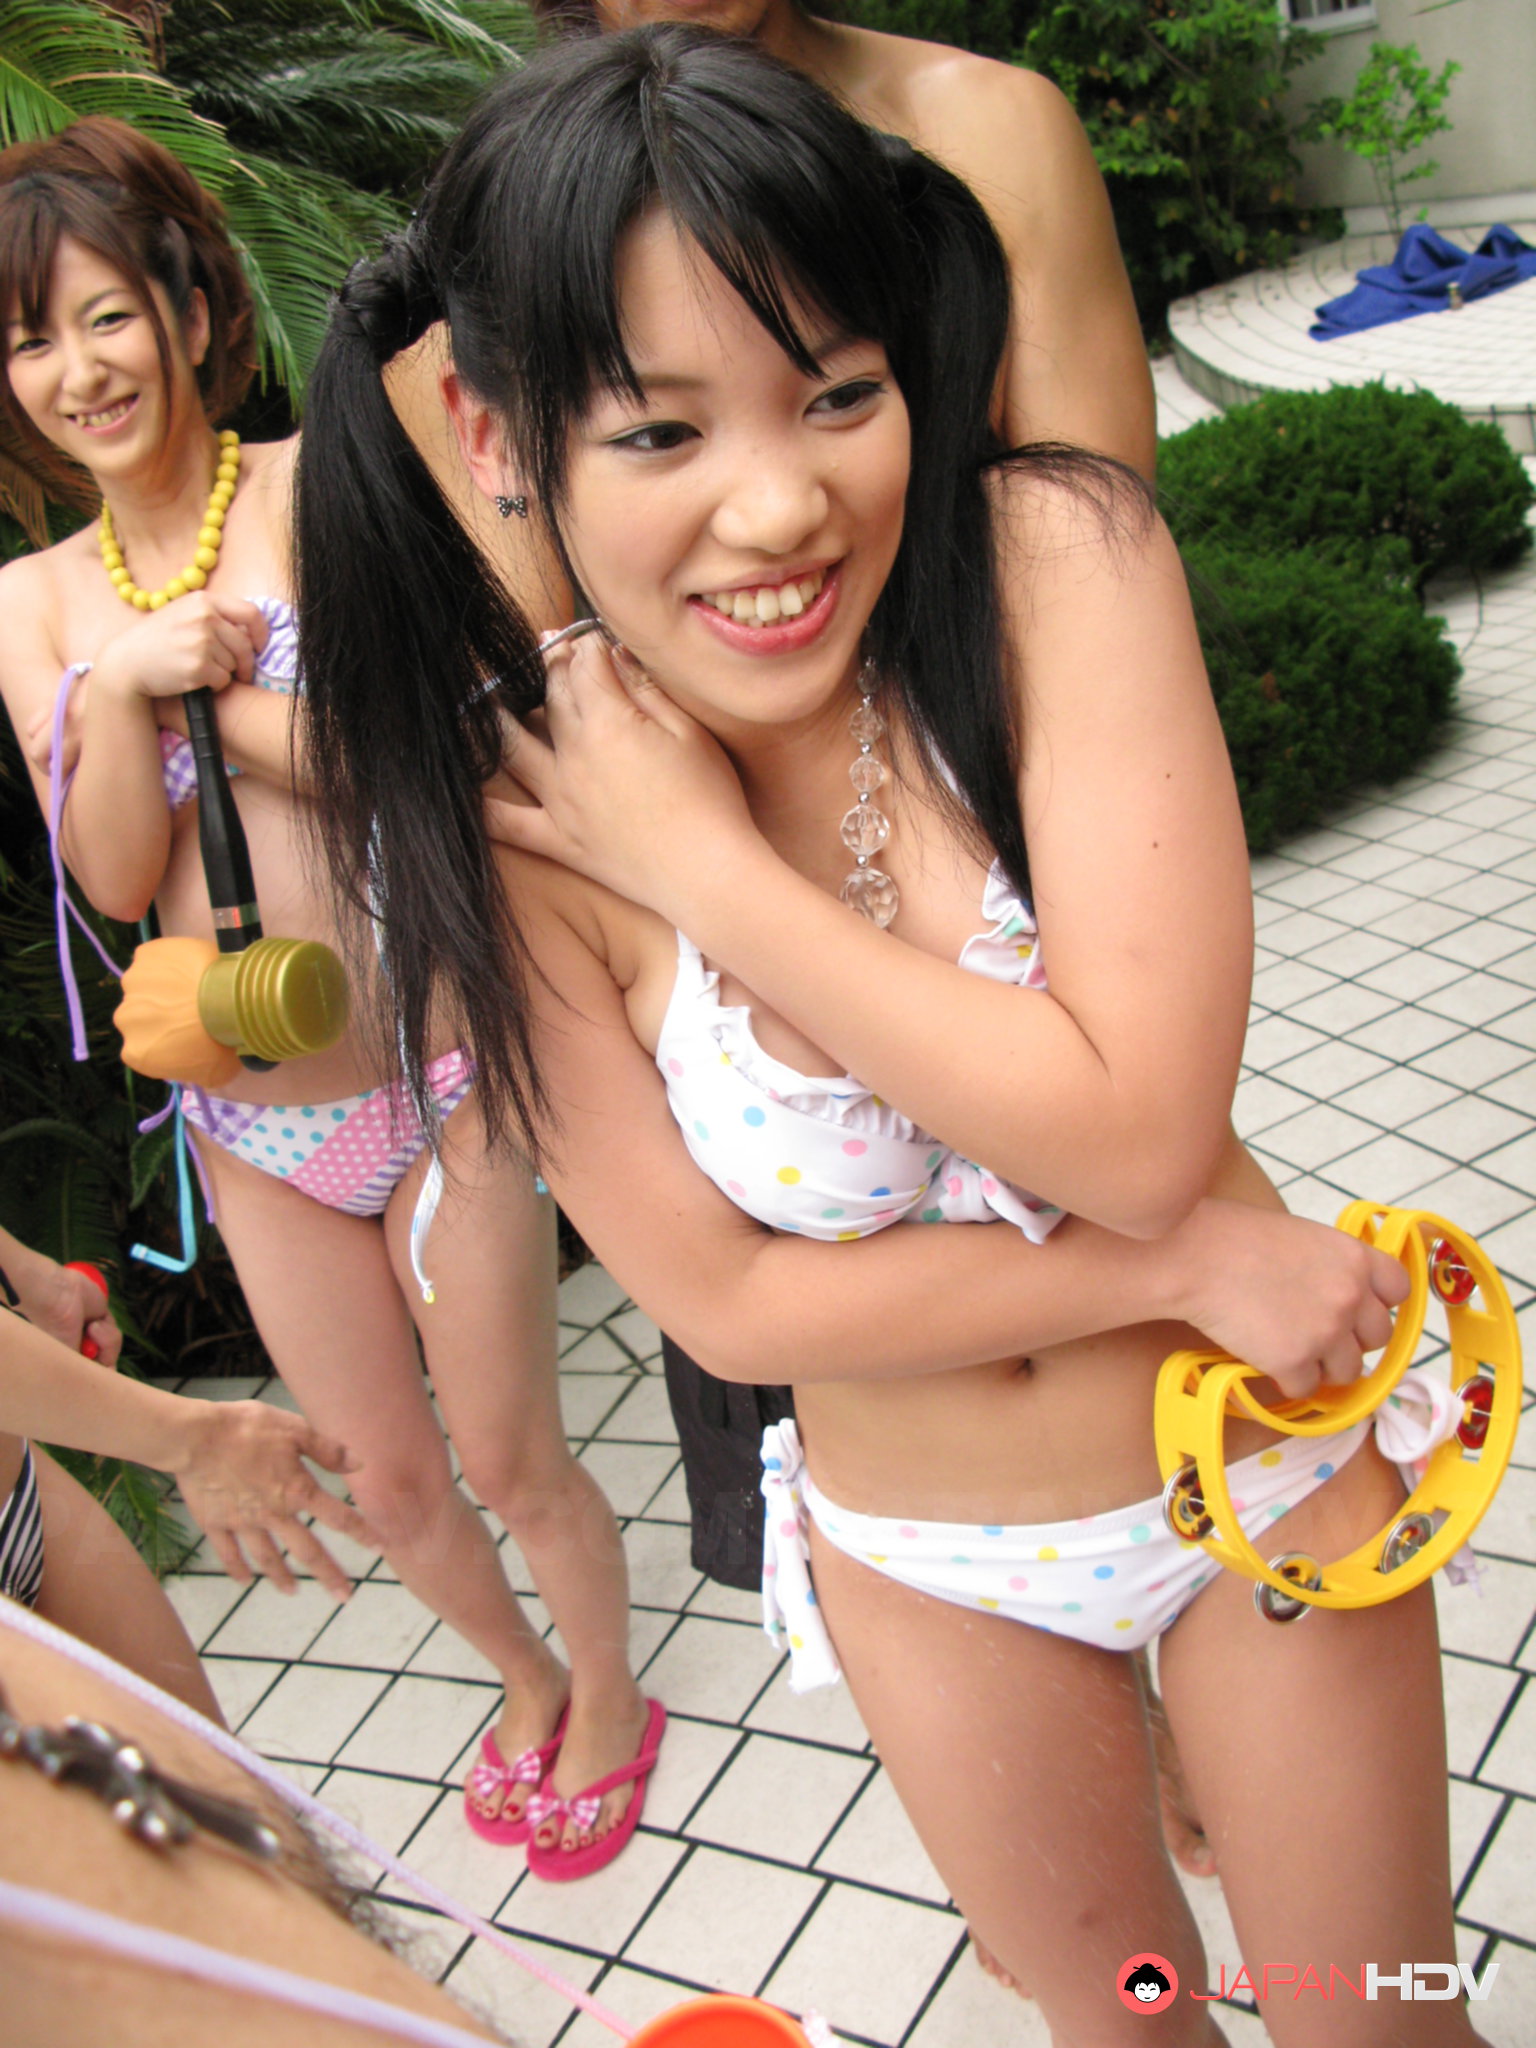 Black Pool Party - Japanese girls enjoy in some sexy pool party